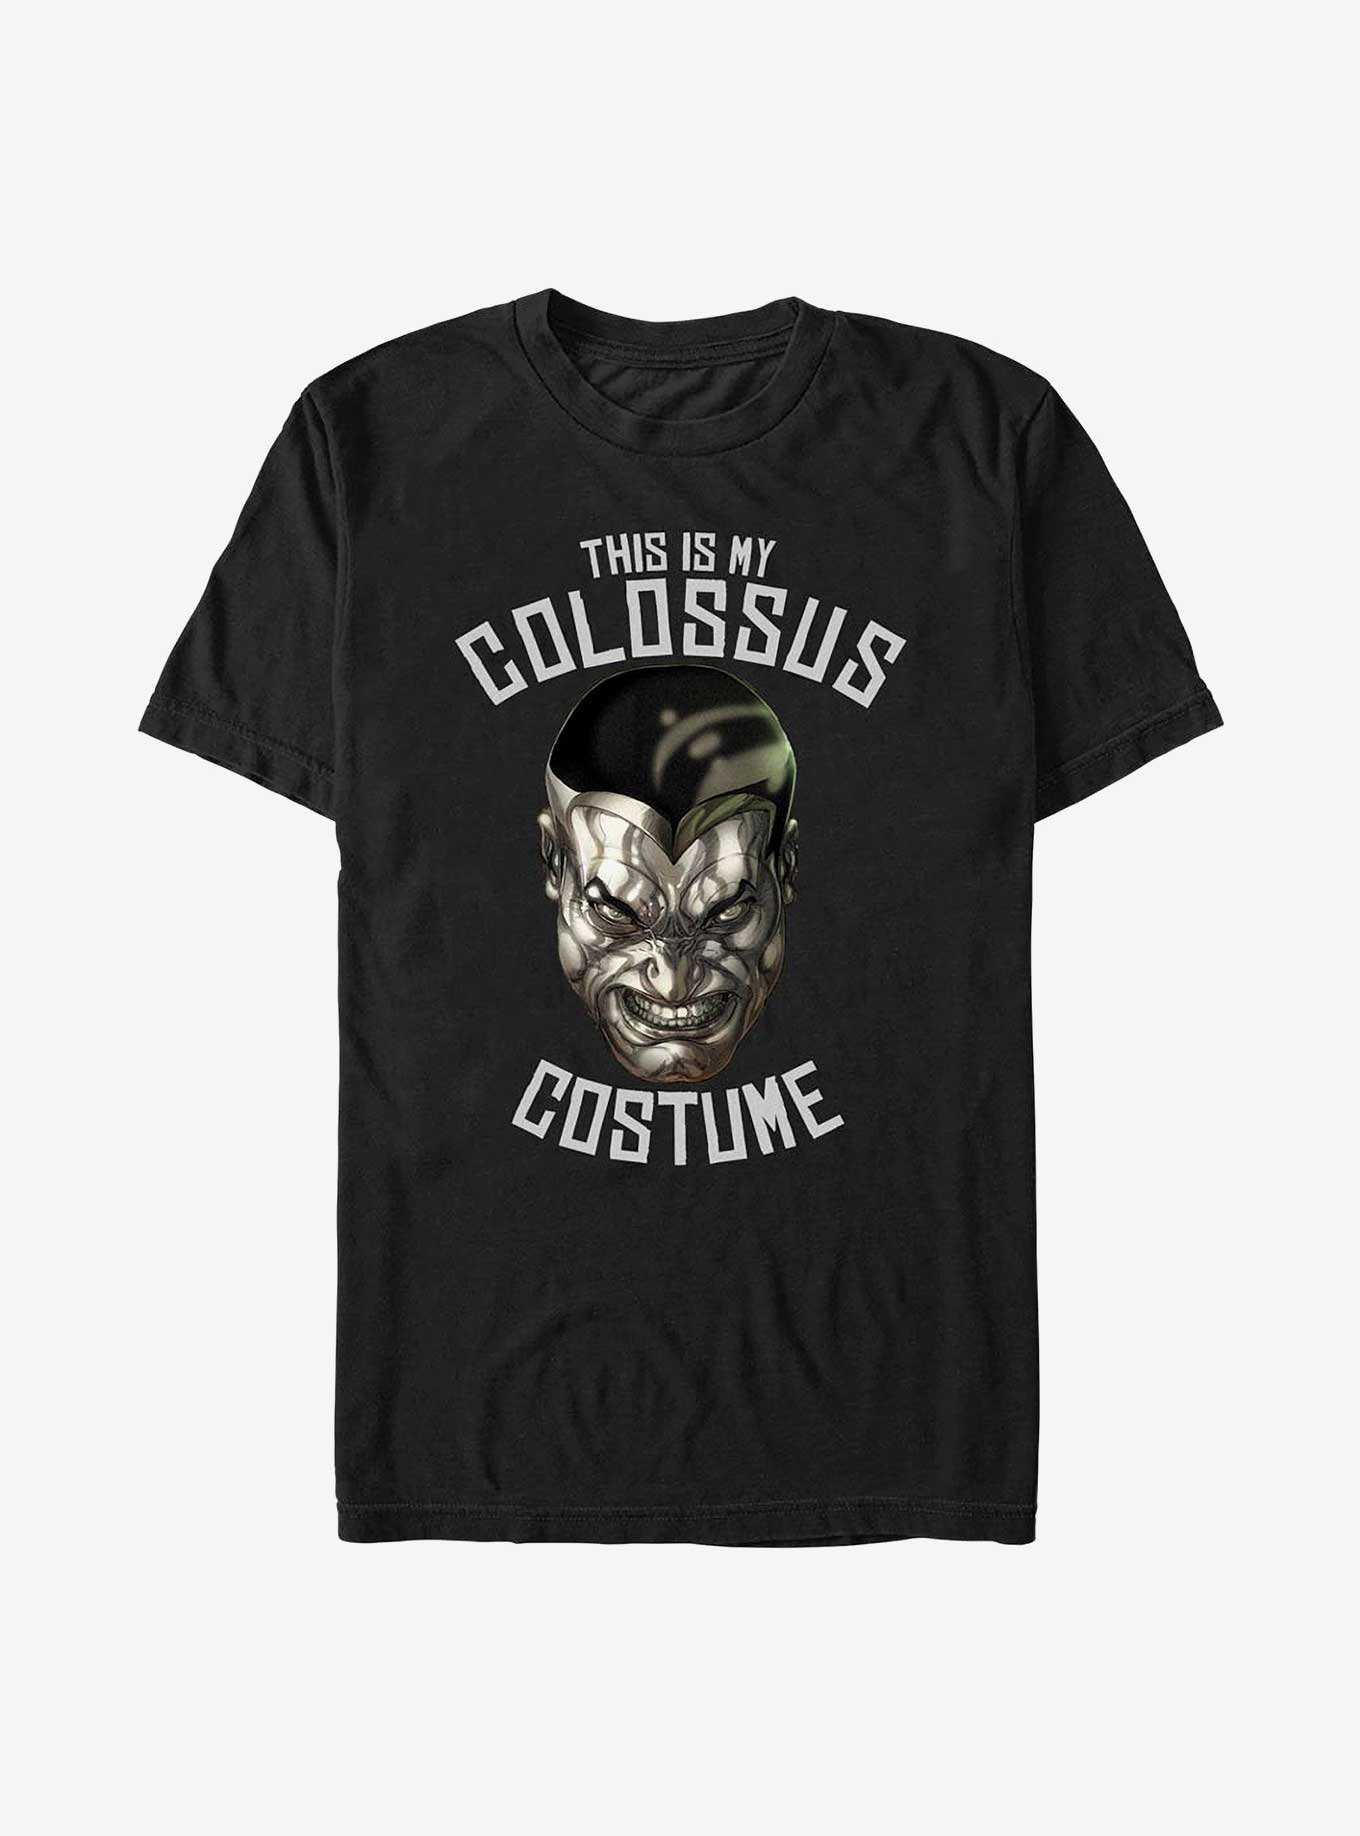 Marvel X-Men This Is My Colossus Costume T-Shirt, , hi-res